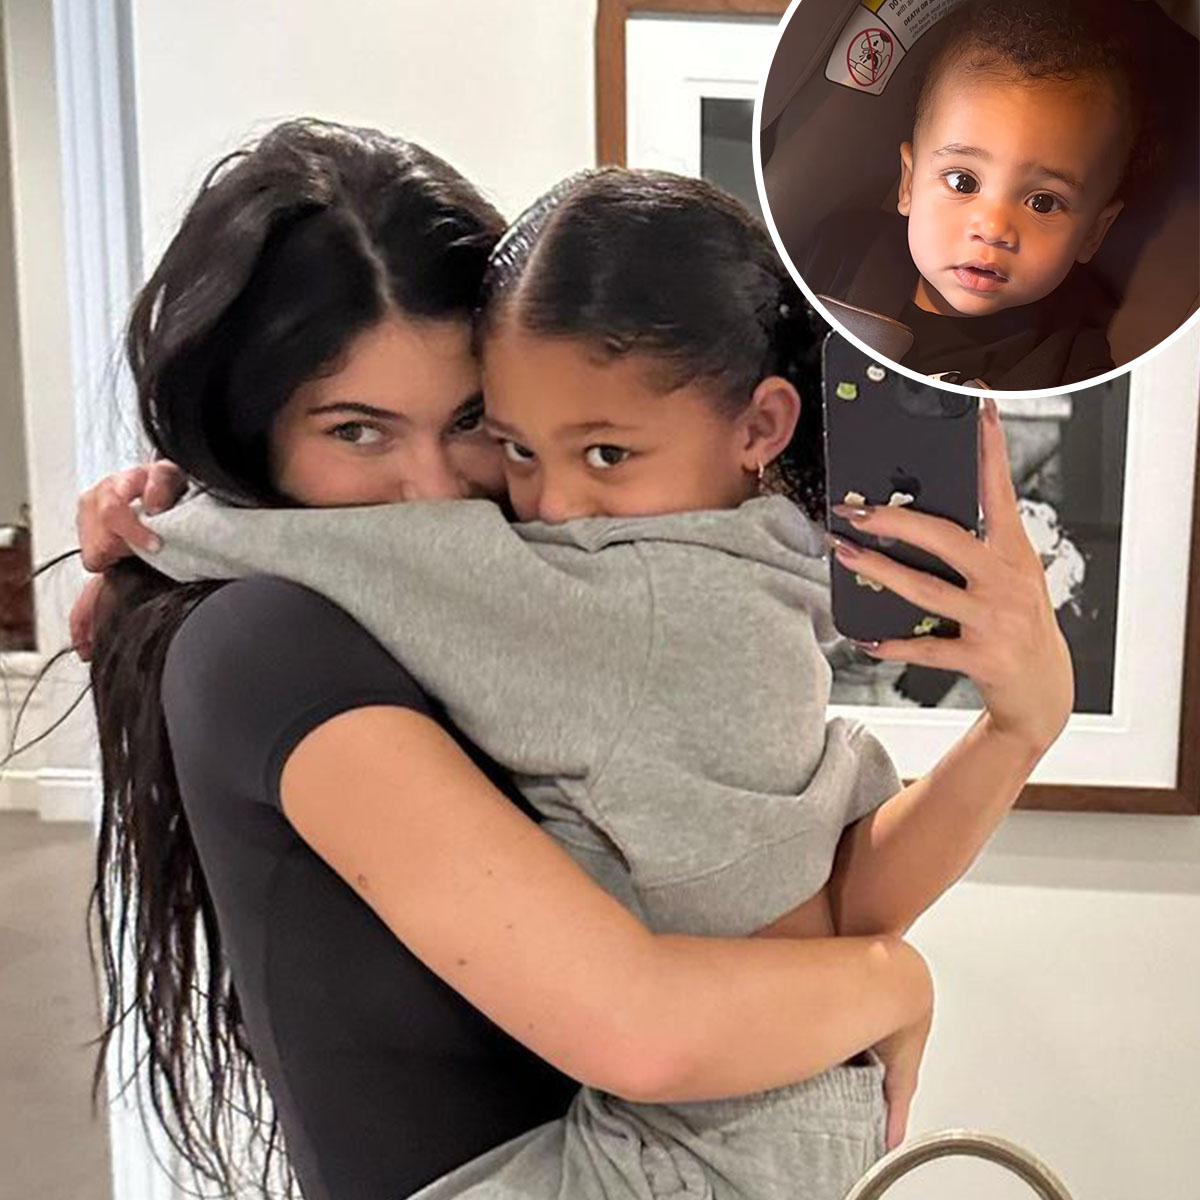 Kylie Jenner Takes Flight for Adventure Time With Kids Stormi and Aire